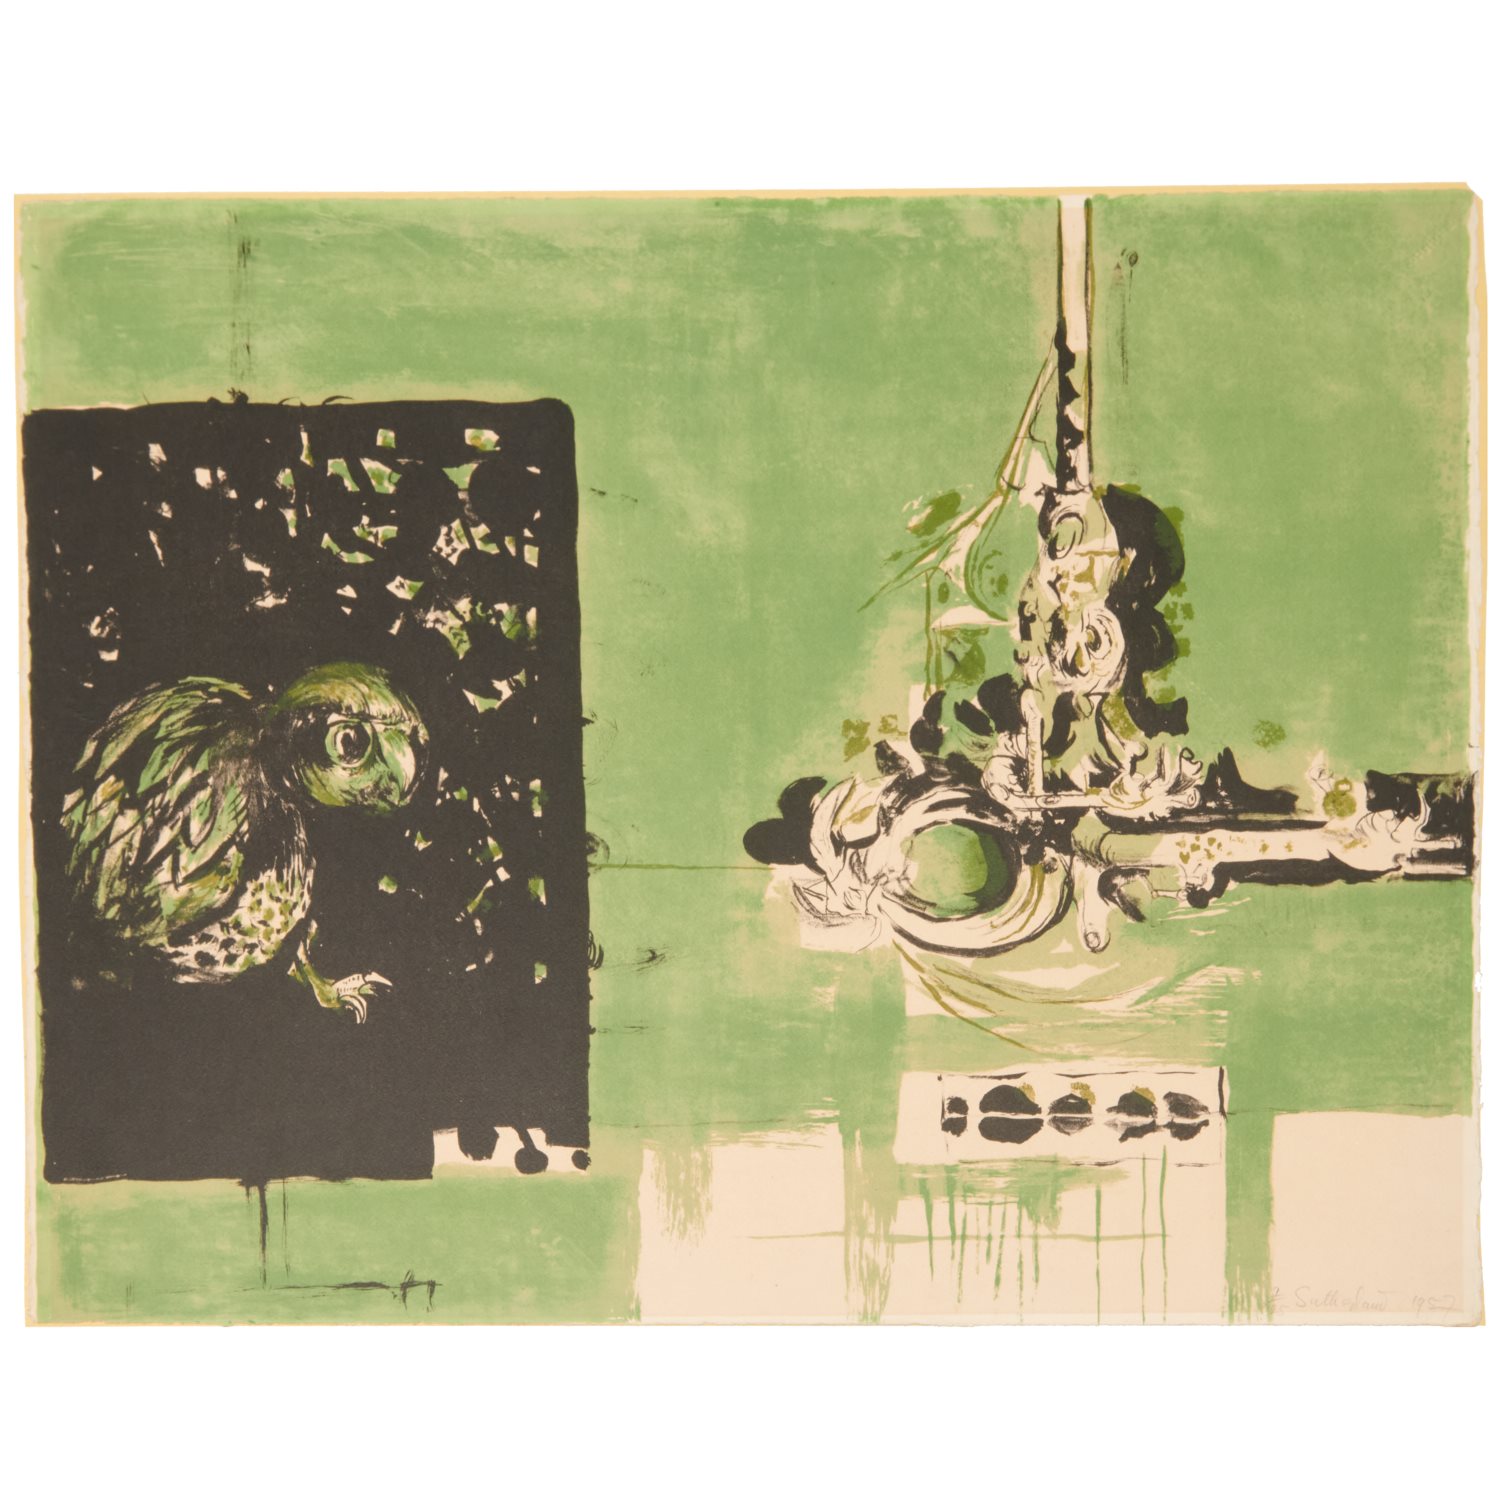 GRAHAM SUTHERLAND, TWO-COLOR LITHOGRAPH,